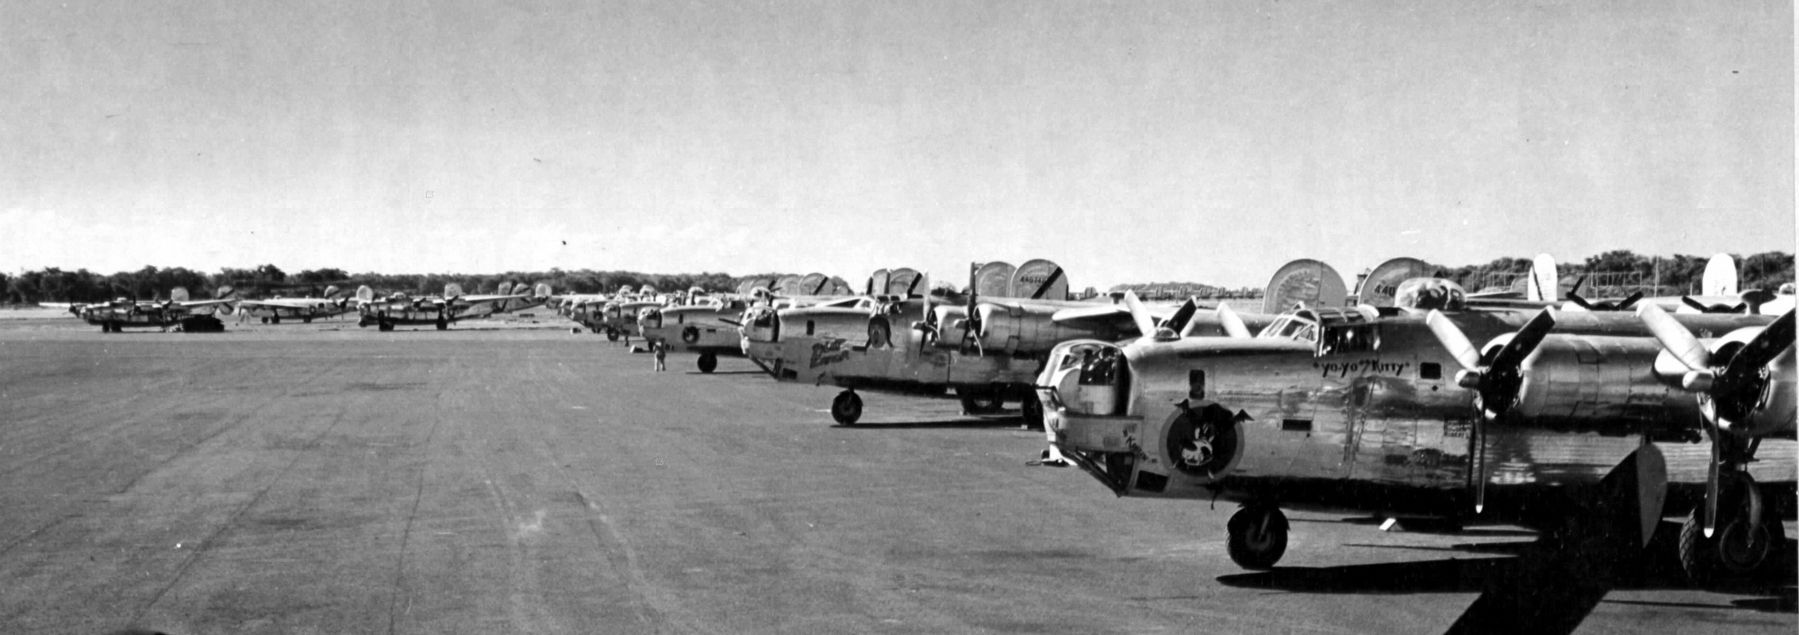 B-24 Liberator bombers of the 494th Bomb Group at Barking Sands Airstrip, Kauai, Hawaii. image. Click for full size.